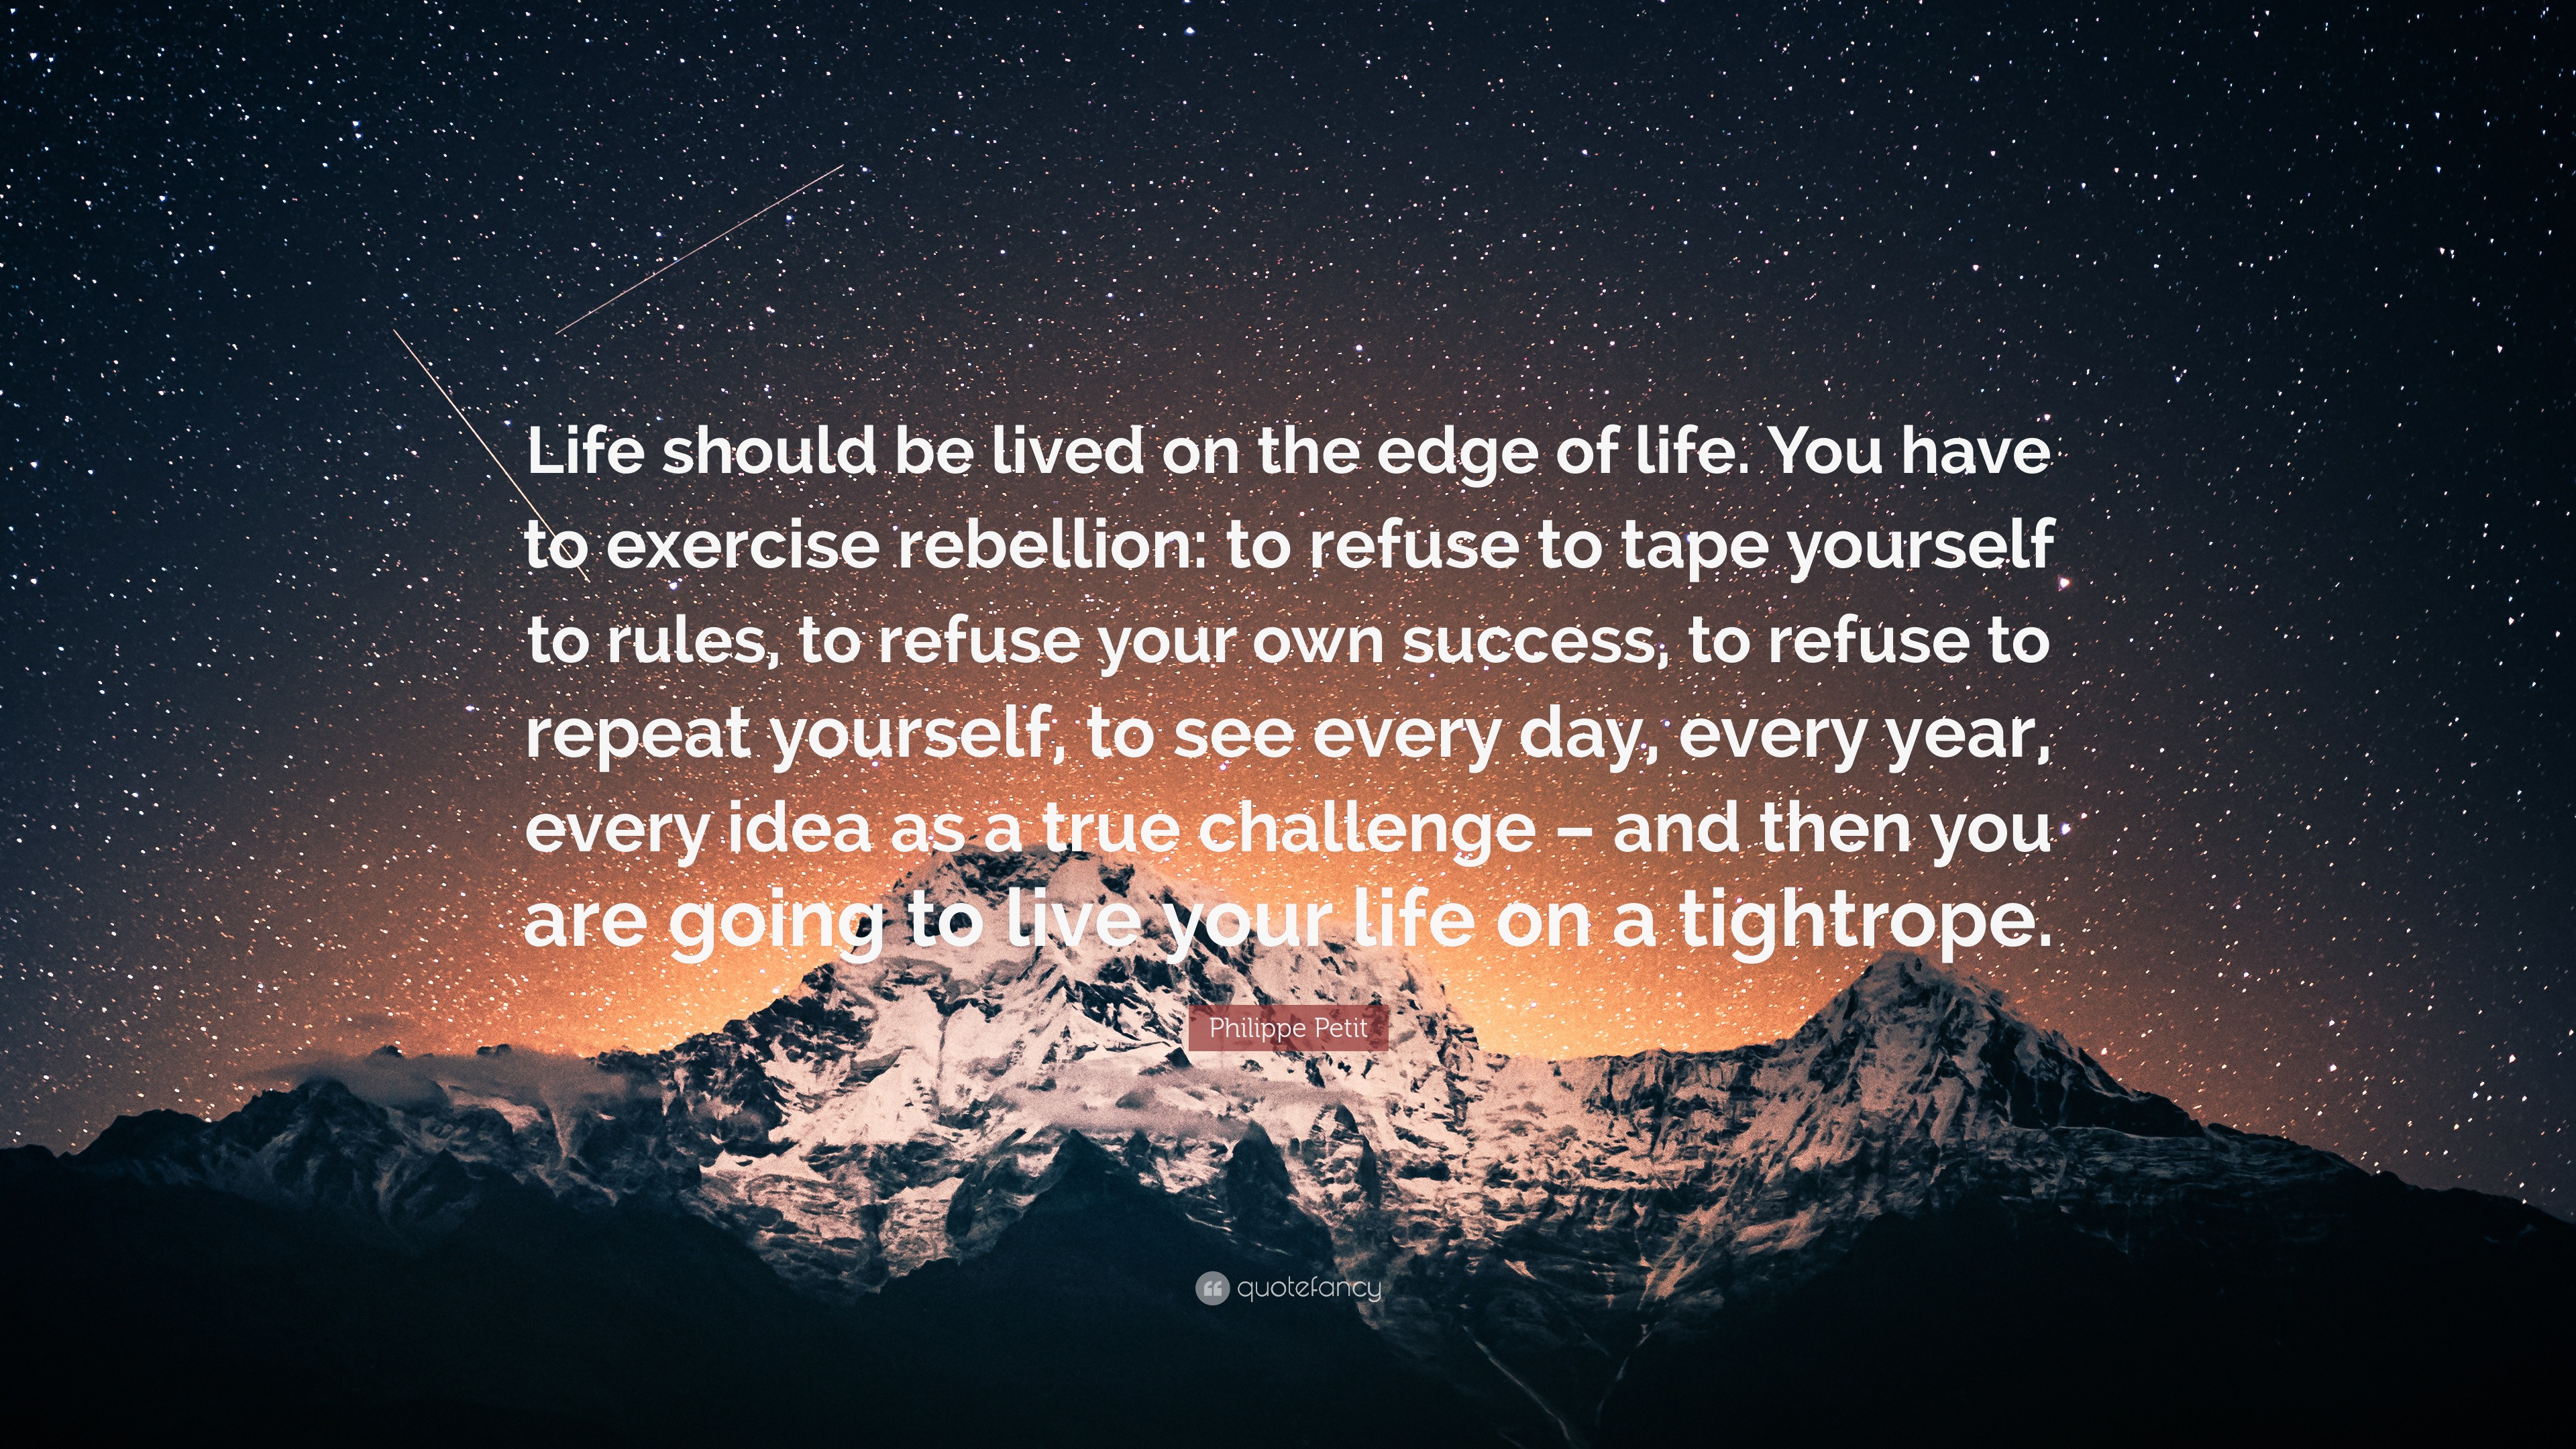 Philippe Petit Quote Life Should Be Lived On The Edge Of Life You Have To Exercise Rebellion To Refuse To Tape Yourself To Rules To Refuse 7 Wallpapers Quotefancy